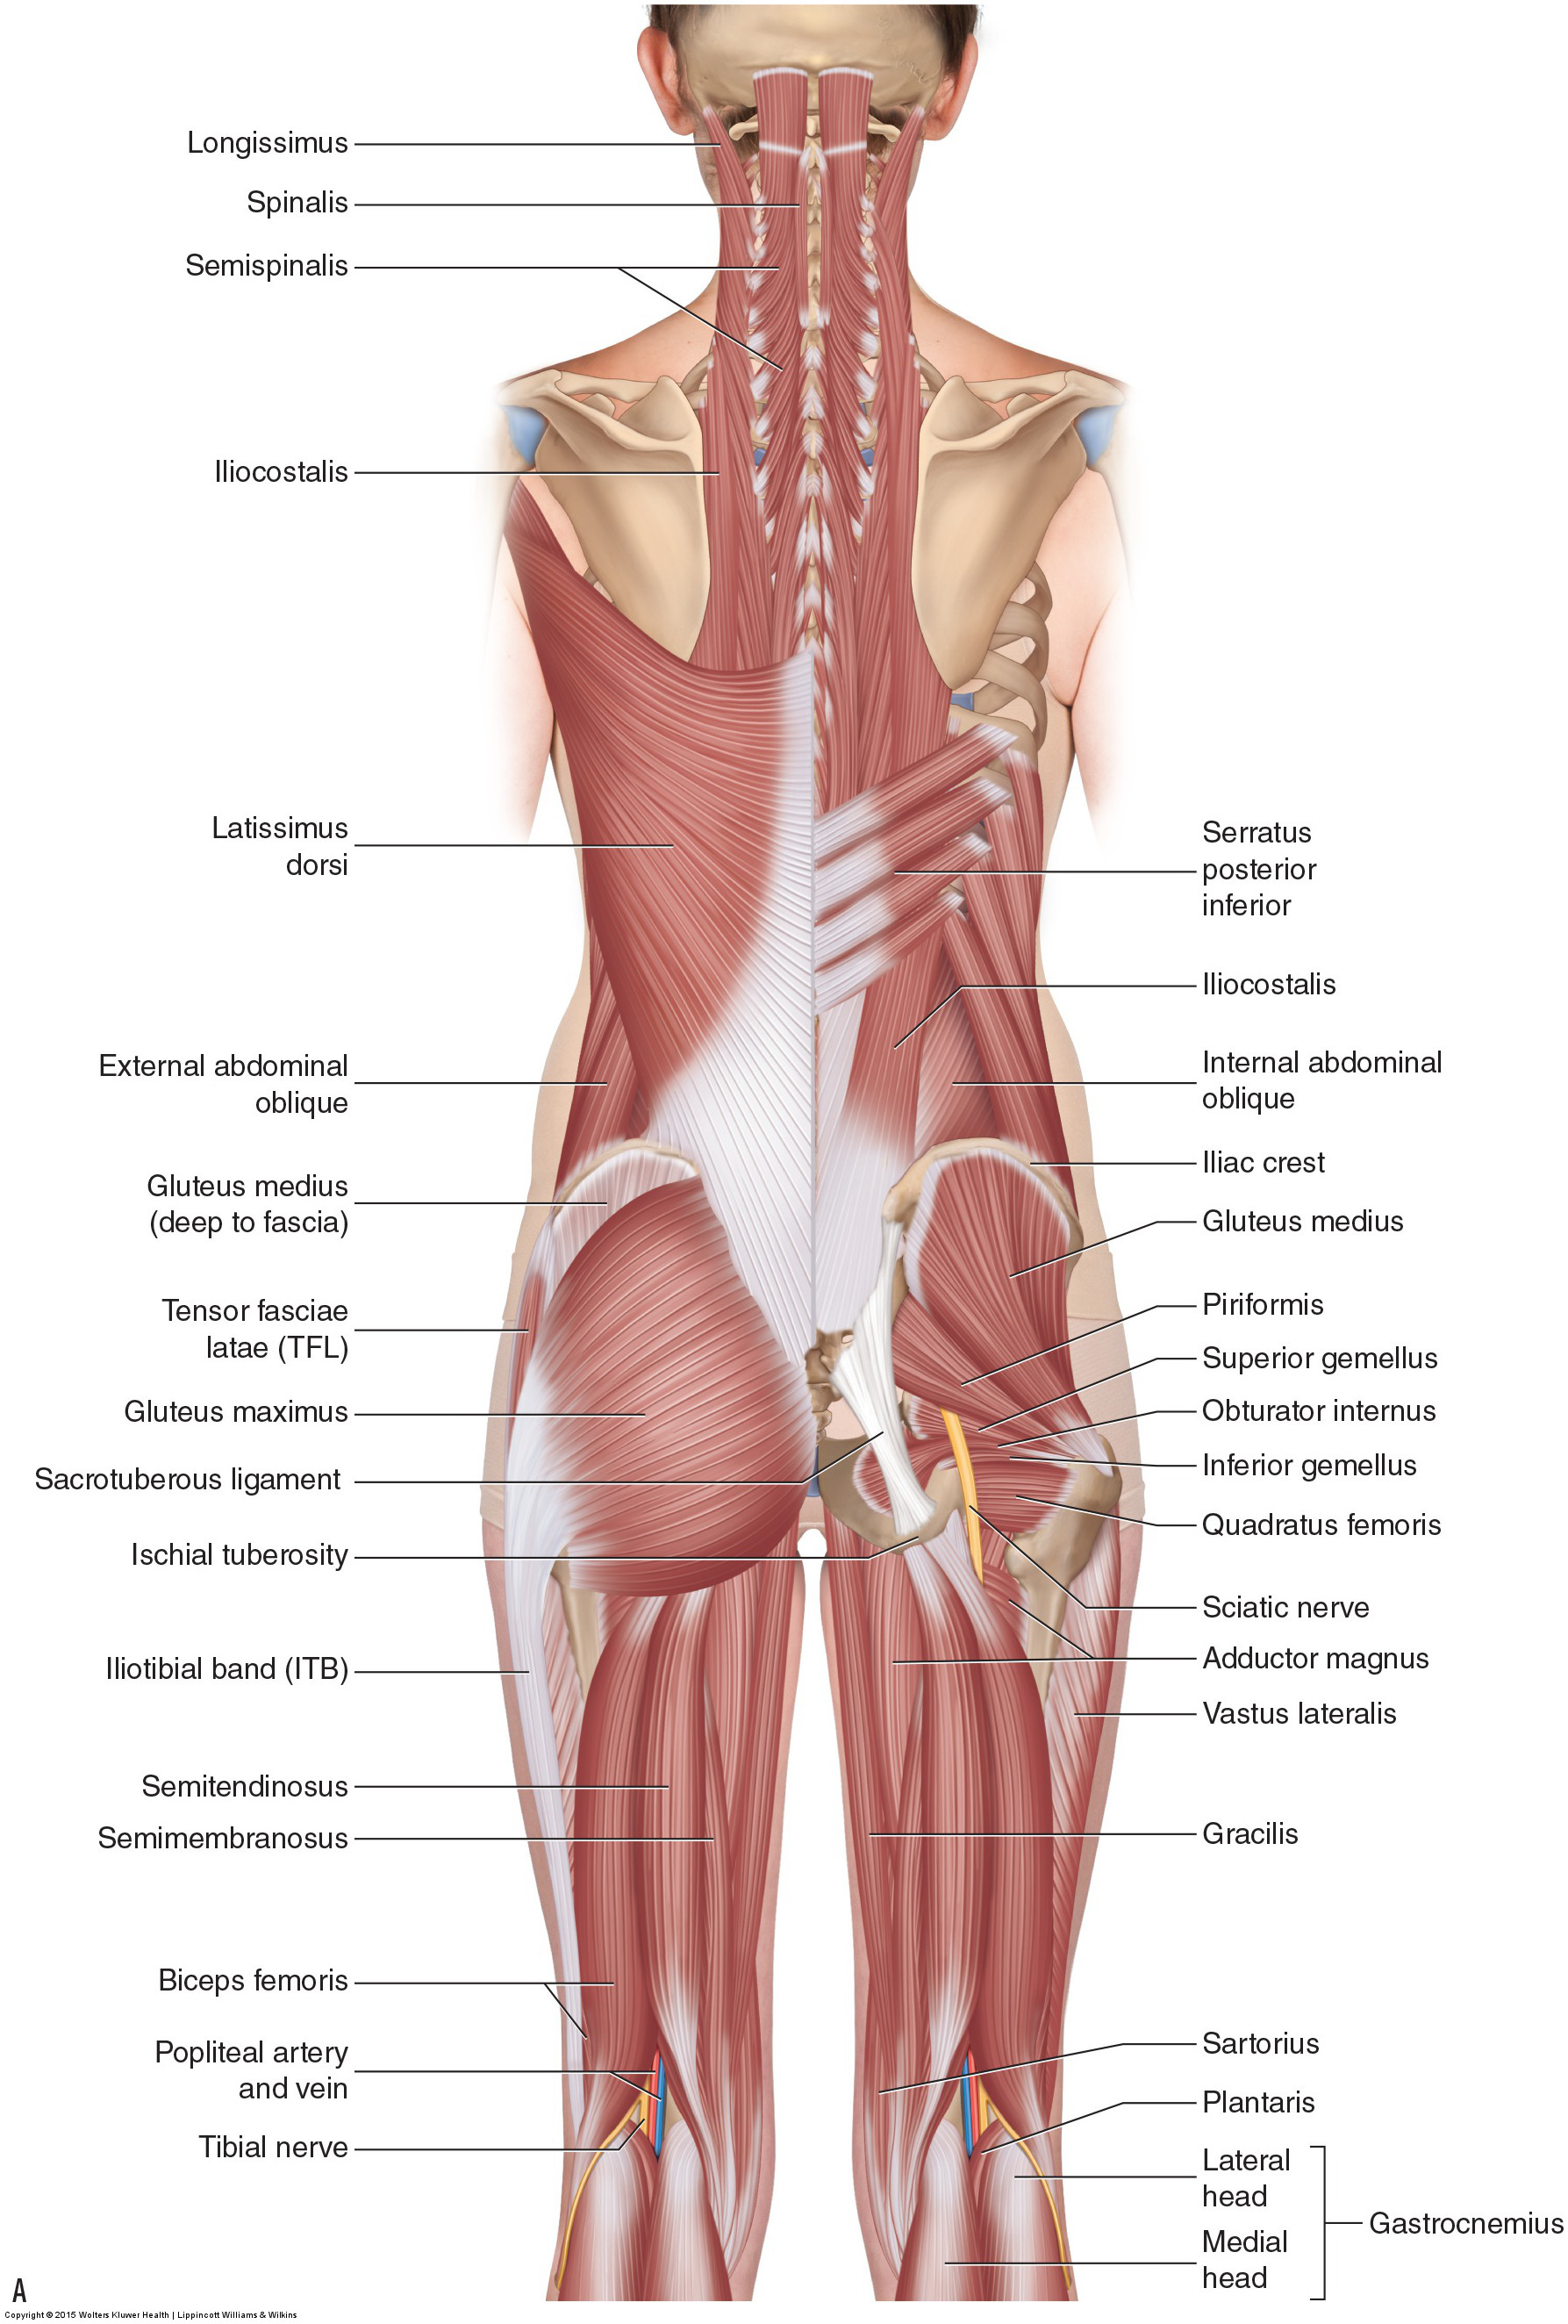 Muscles of the Lumbar Spine of the Trunk